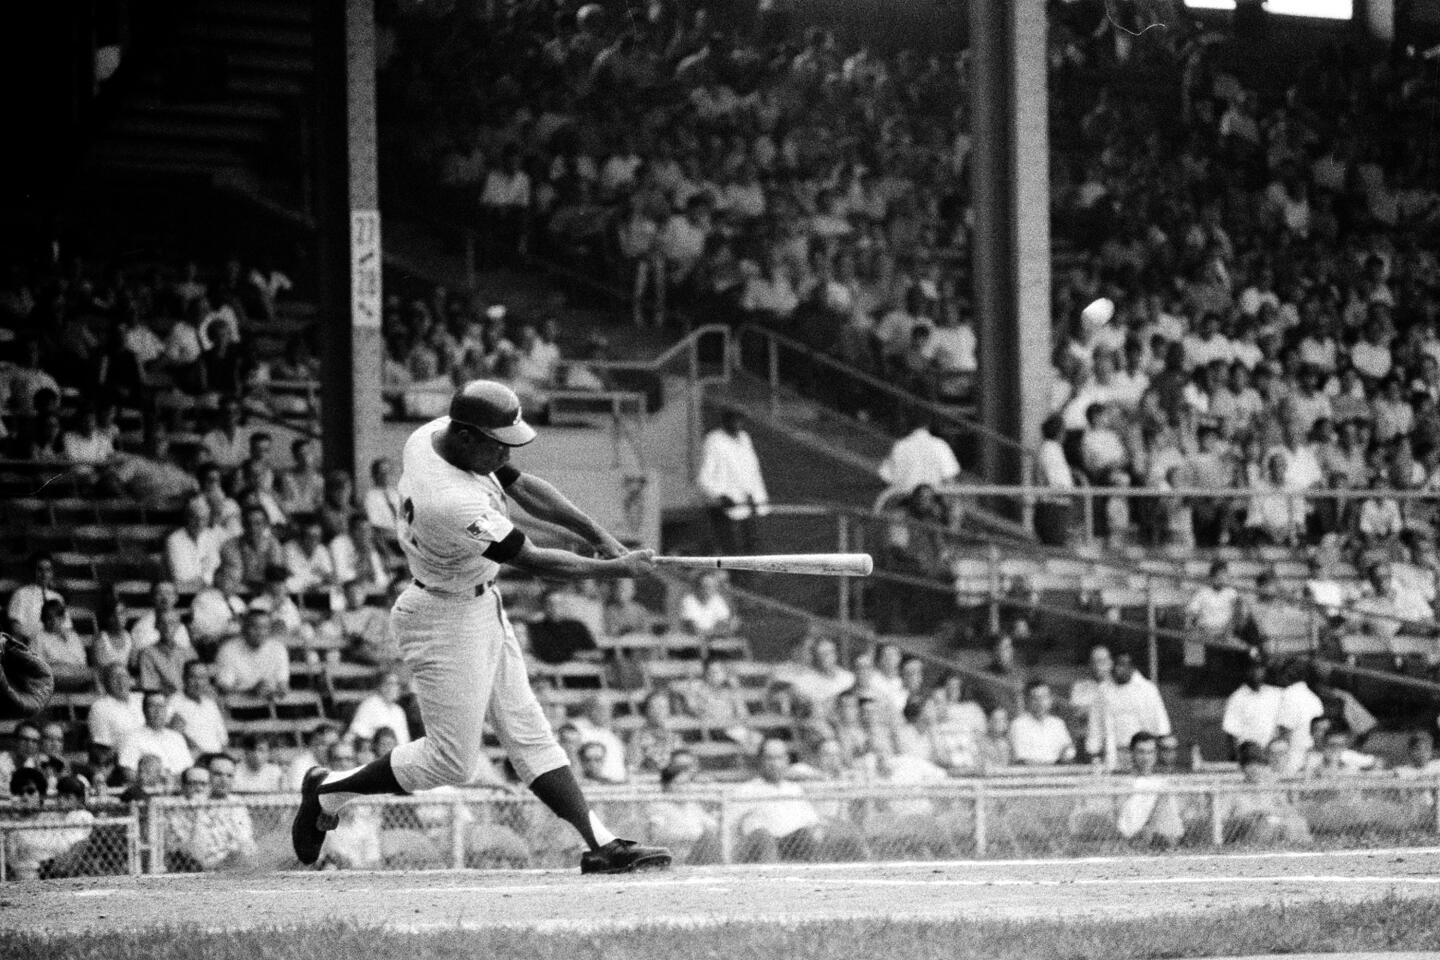 Hank Aaron hits his first career home run at Fenway Park in 1975